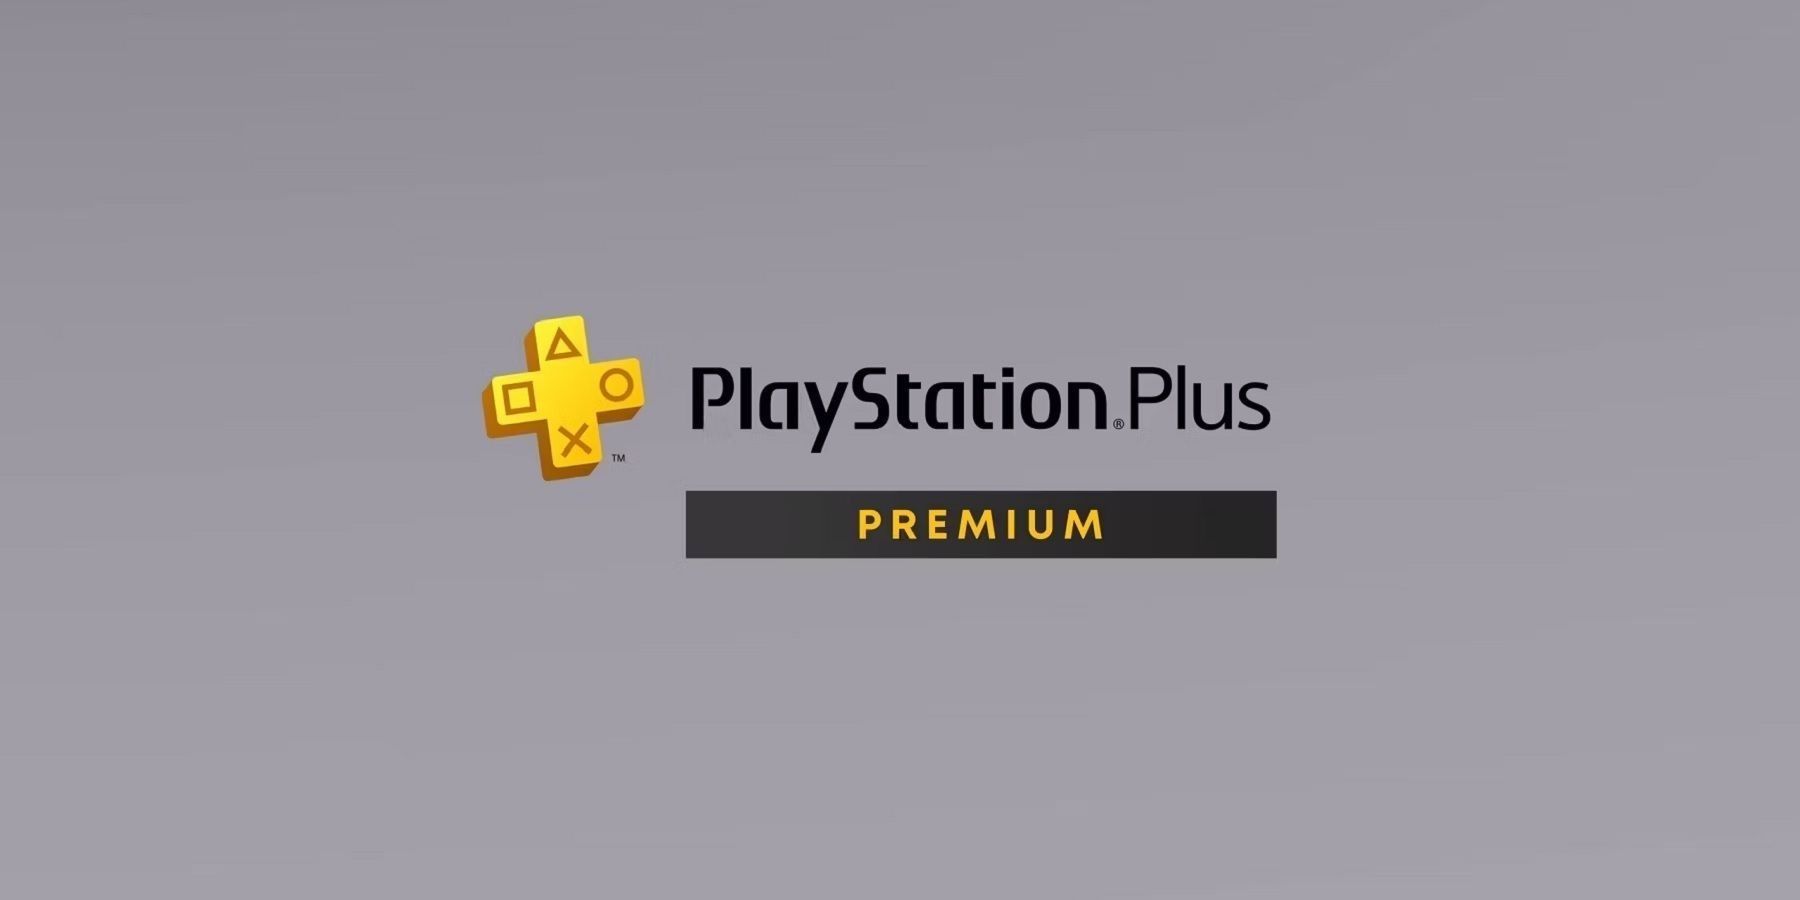 PS Plus Premium Game Adds Trophy Support